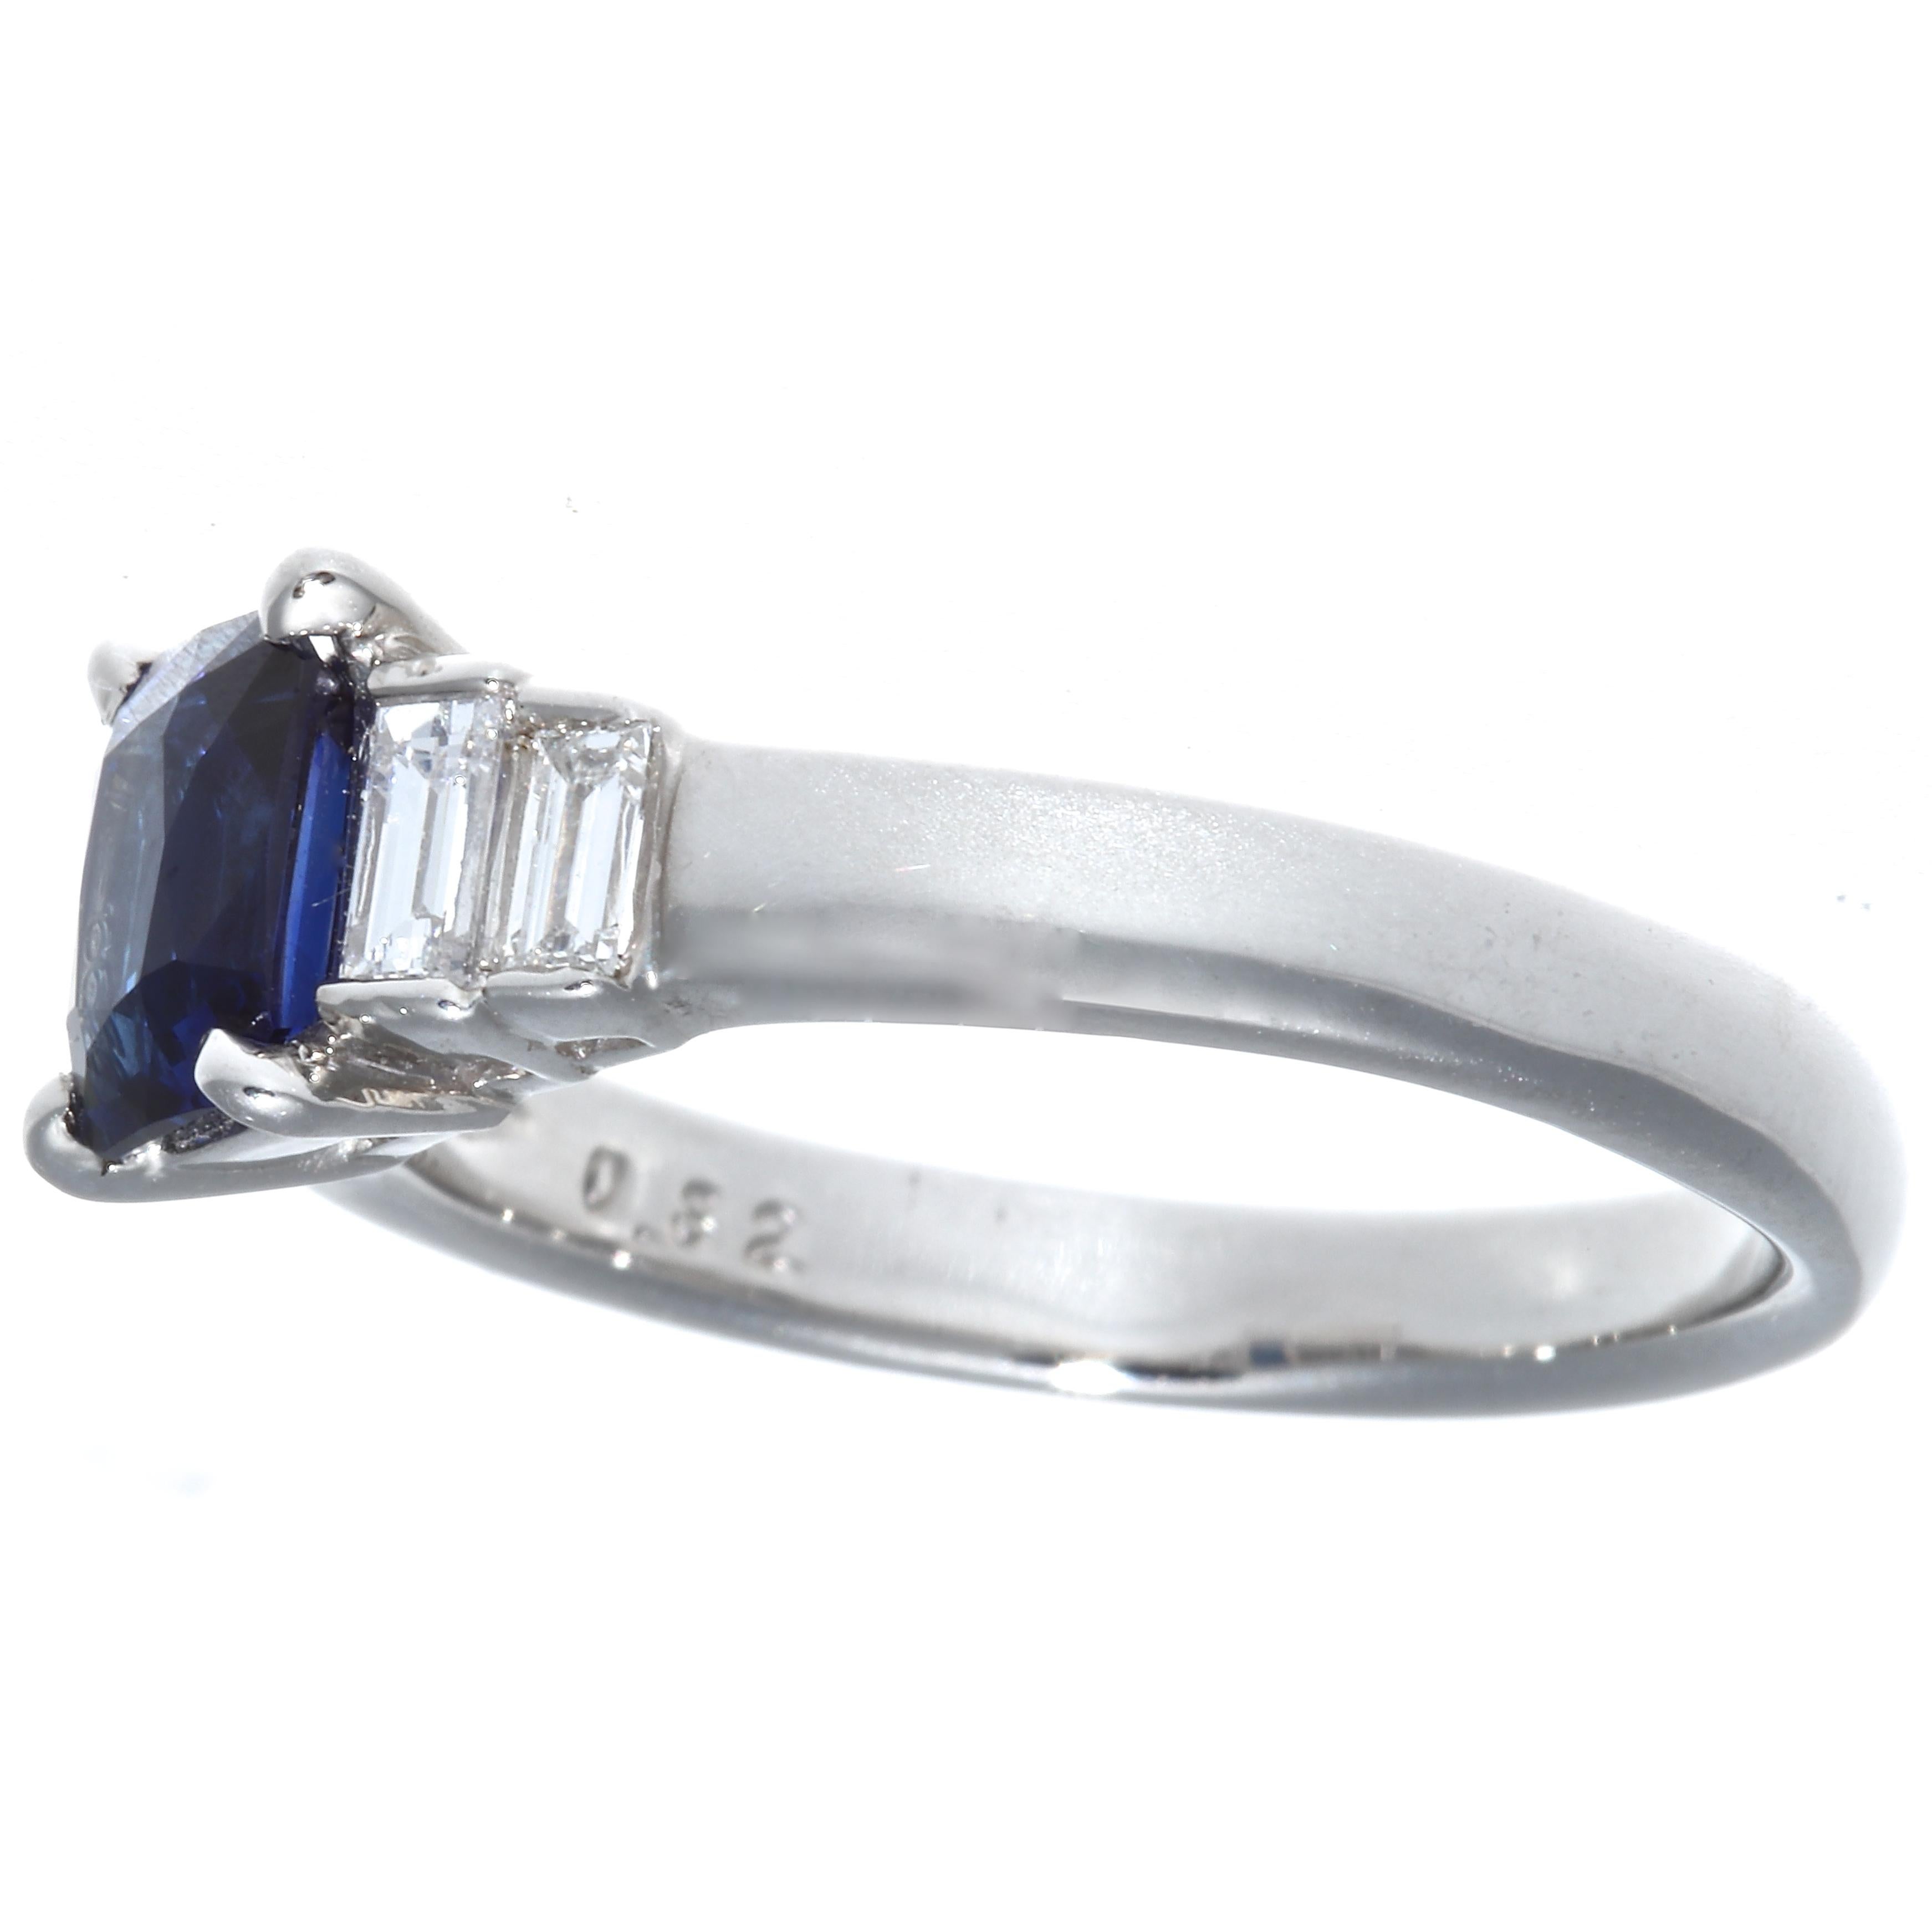 A solidly well made ring. The nicely saturated, translucent sapphire weighs 1.07 carats. The accenting 4 emerald cut diamonds weigh 0.32 carats, D,E color, VVS clarity. The ring is platinum, size 6 1/2 and may easily be re-sized to fit. 
Flawless